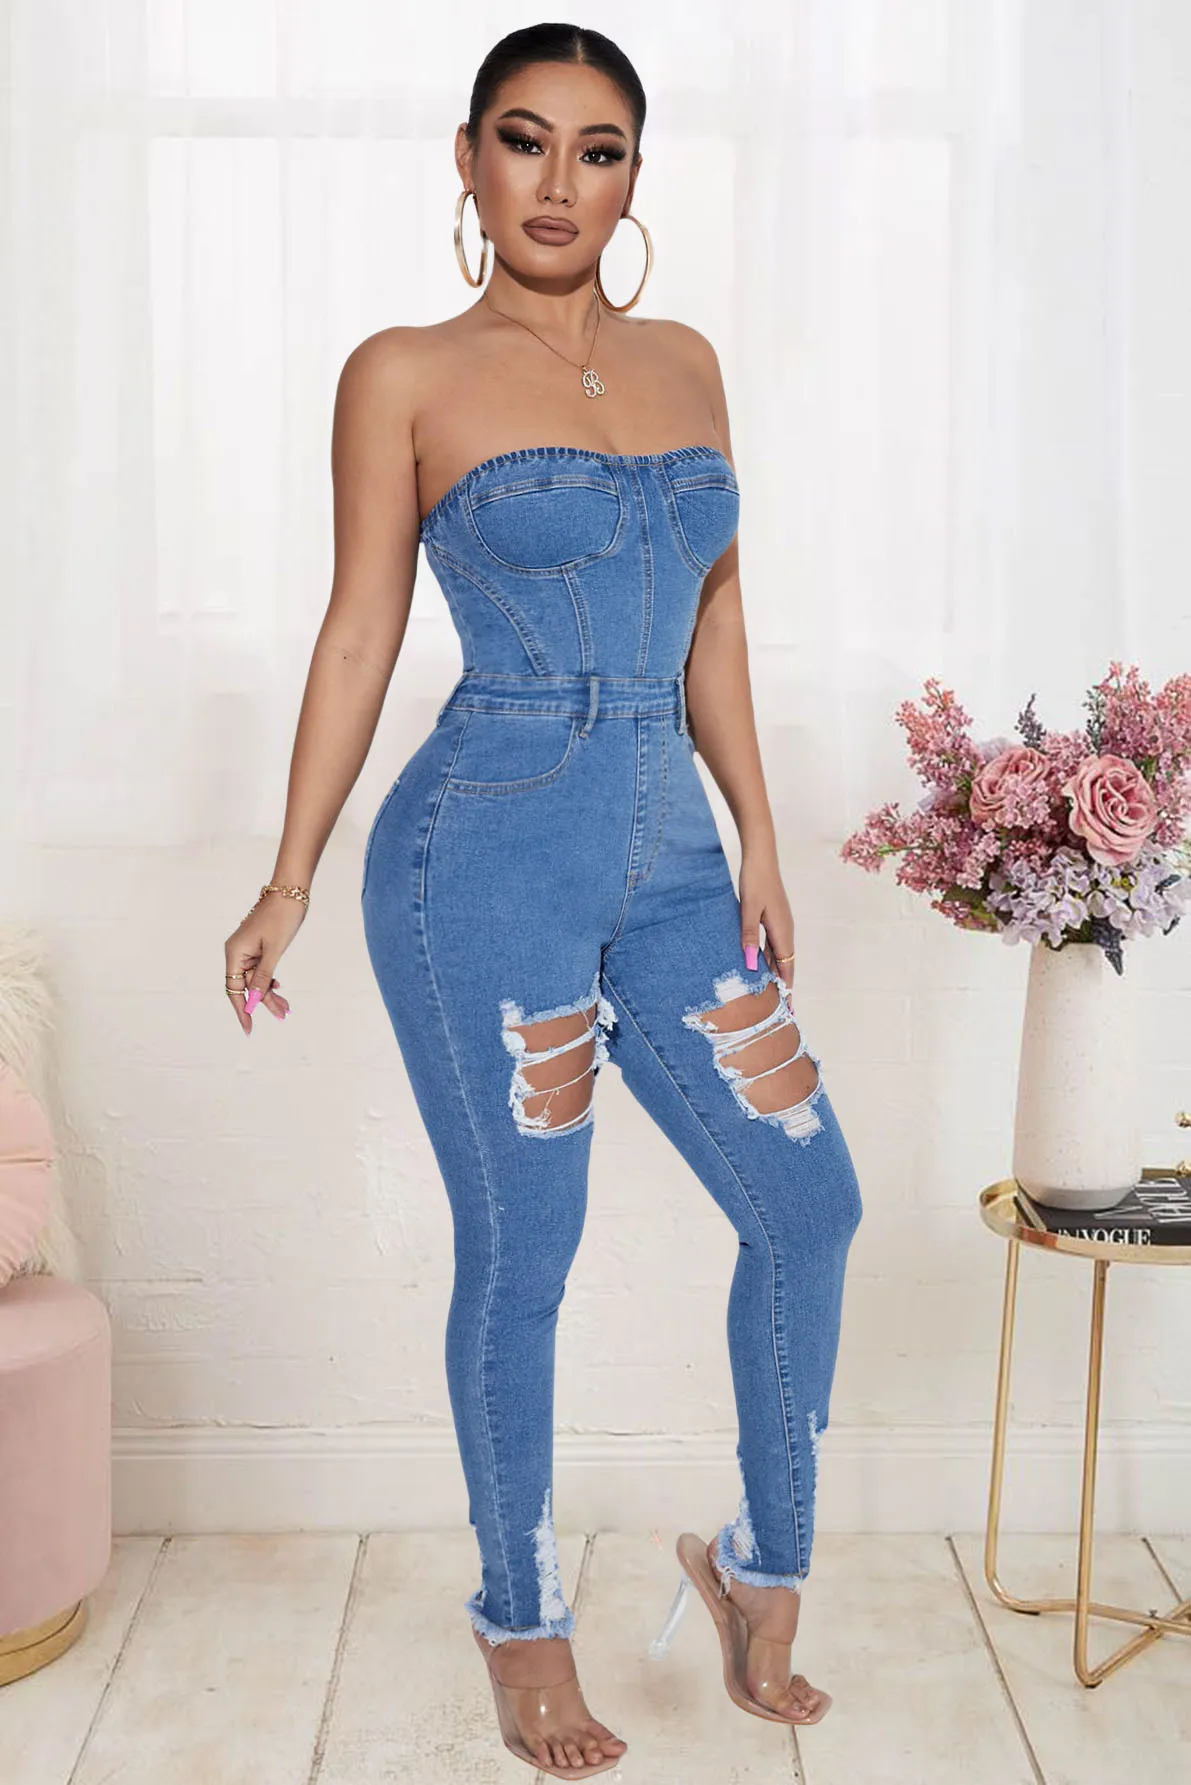 Sexy Nightclub Party Bandeau Jumpsuits for Women Sleeveless Zipper Frosted Holes Bodysuit Fashion Elegant Denim Womens Clothing